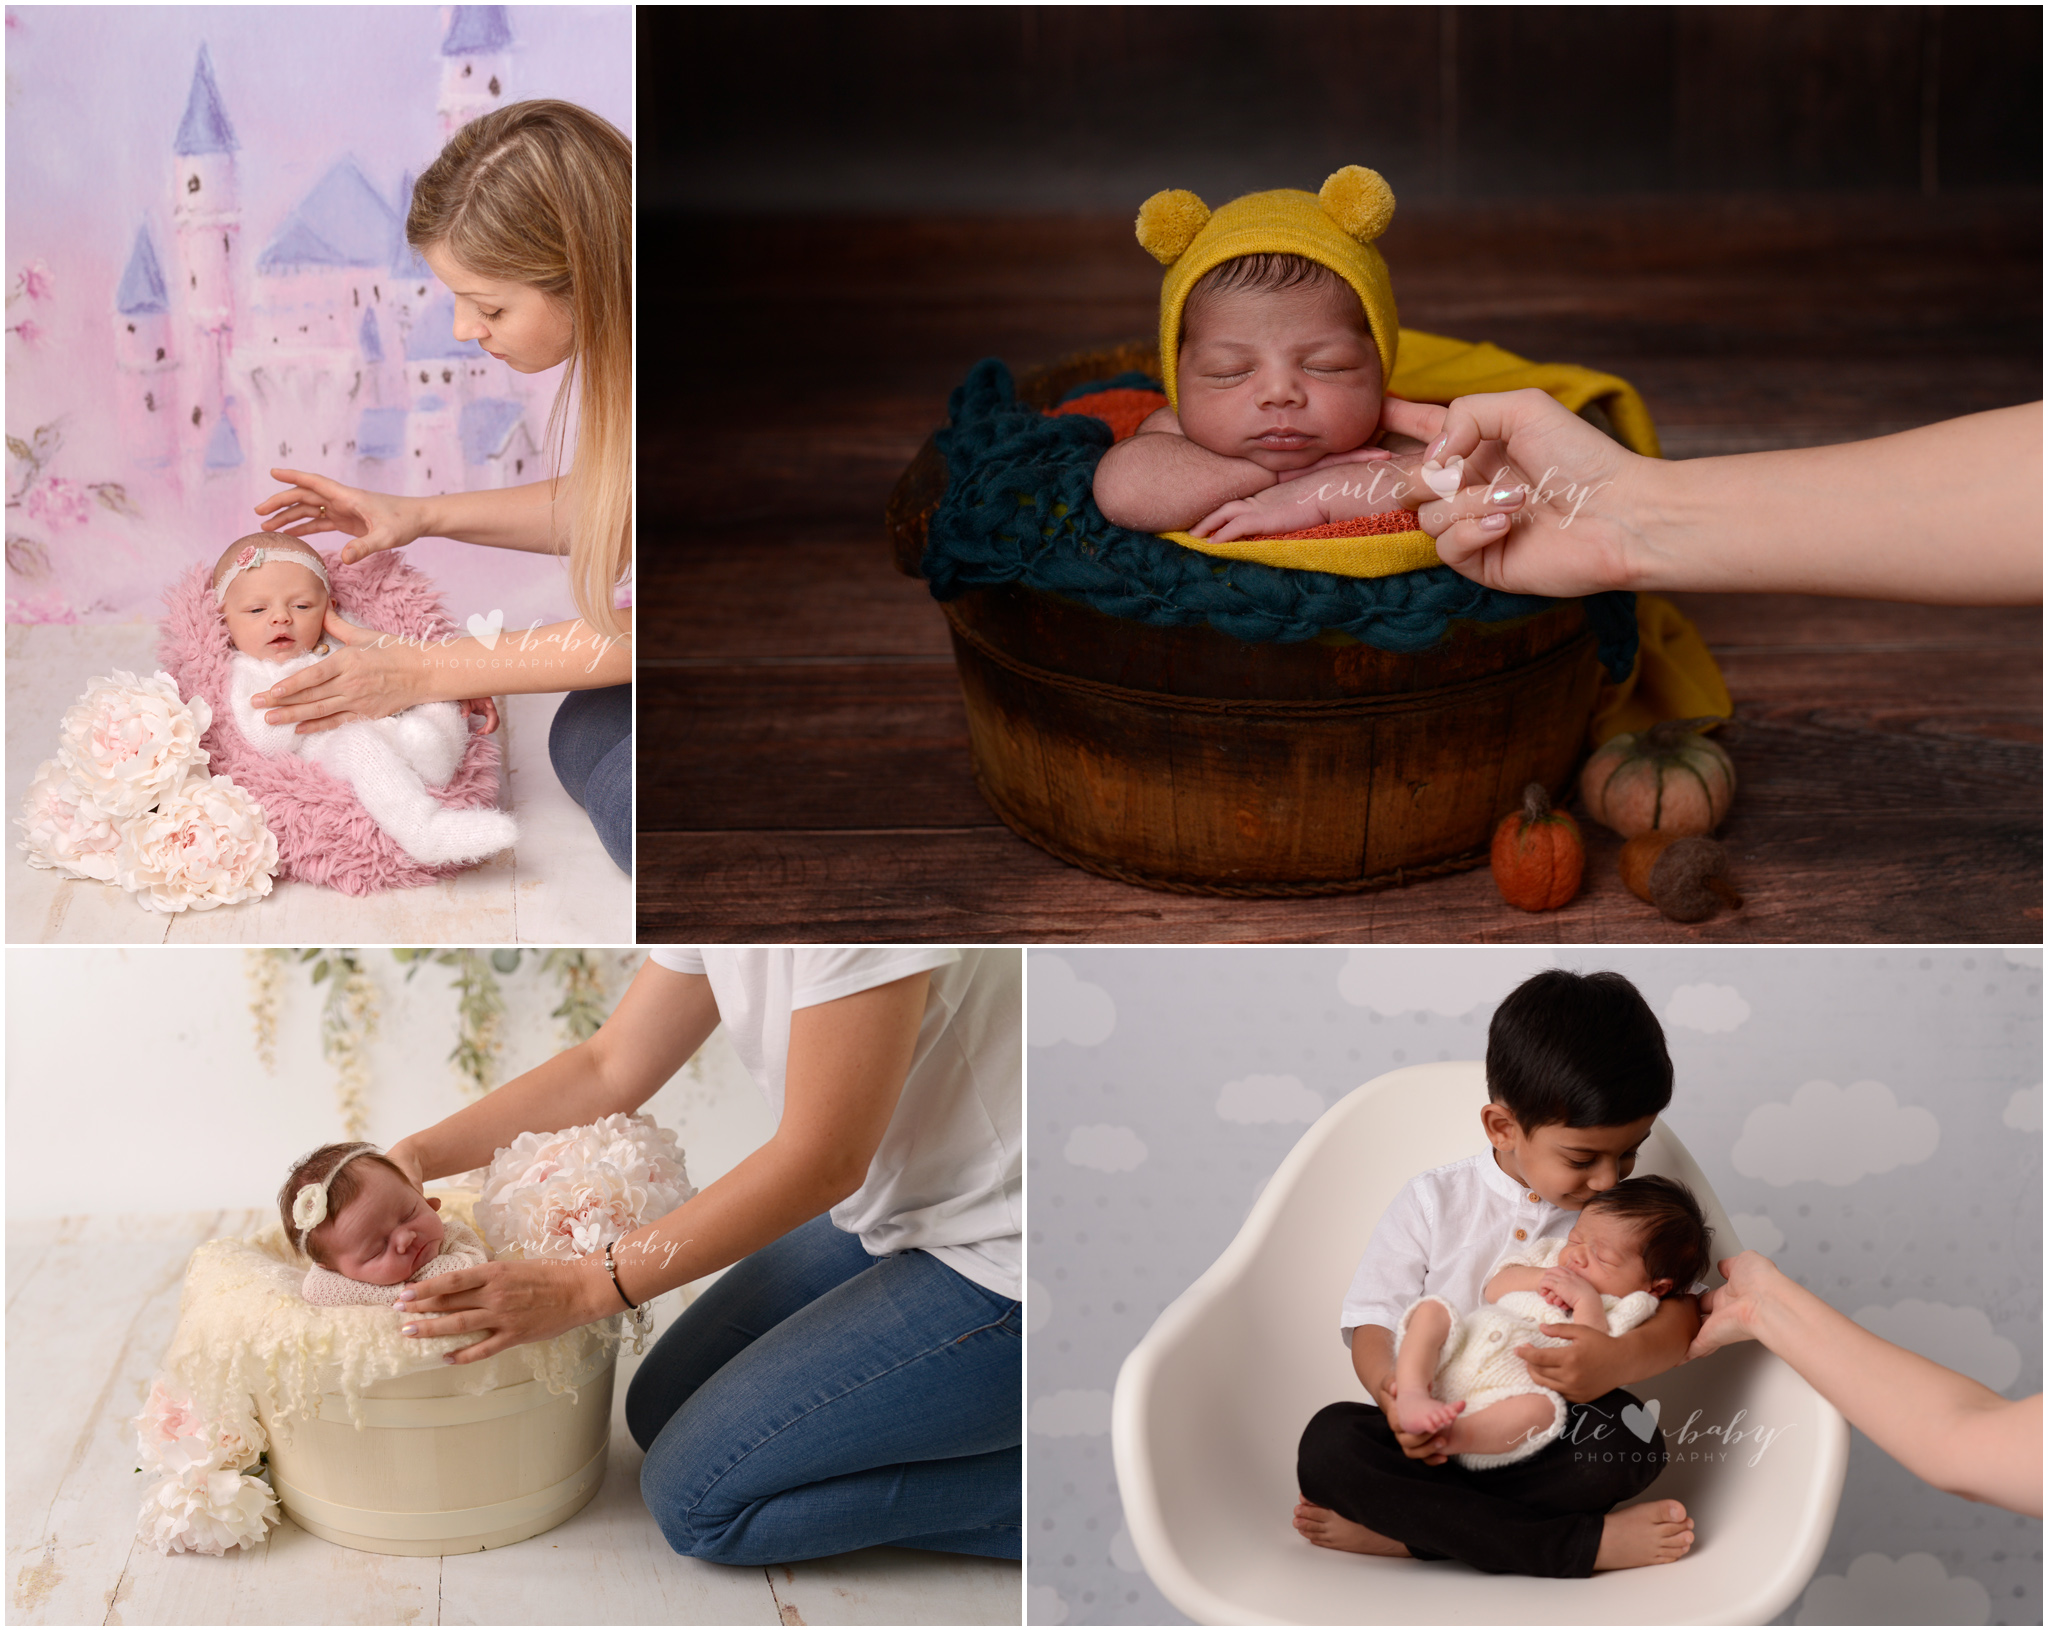 Newborn Photography Manchester, Newborn Pictures Cheshire, Cute Baby Photography